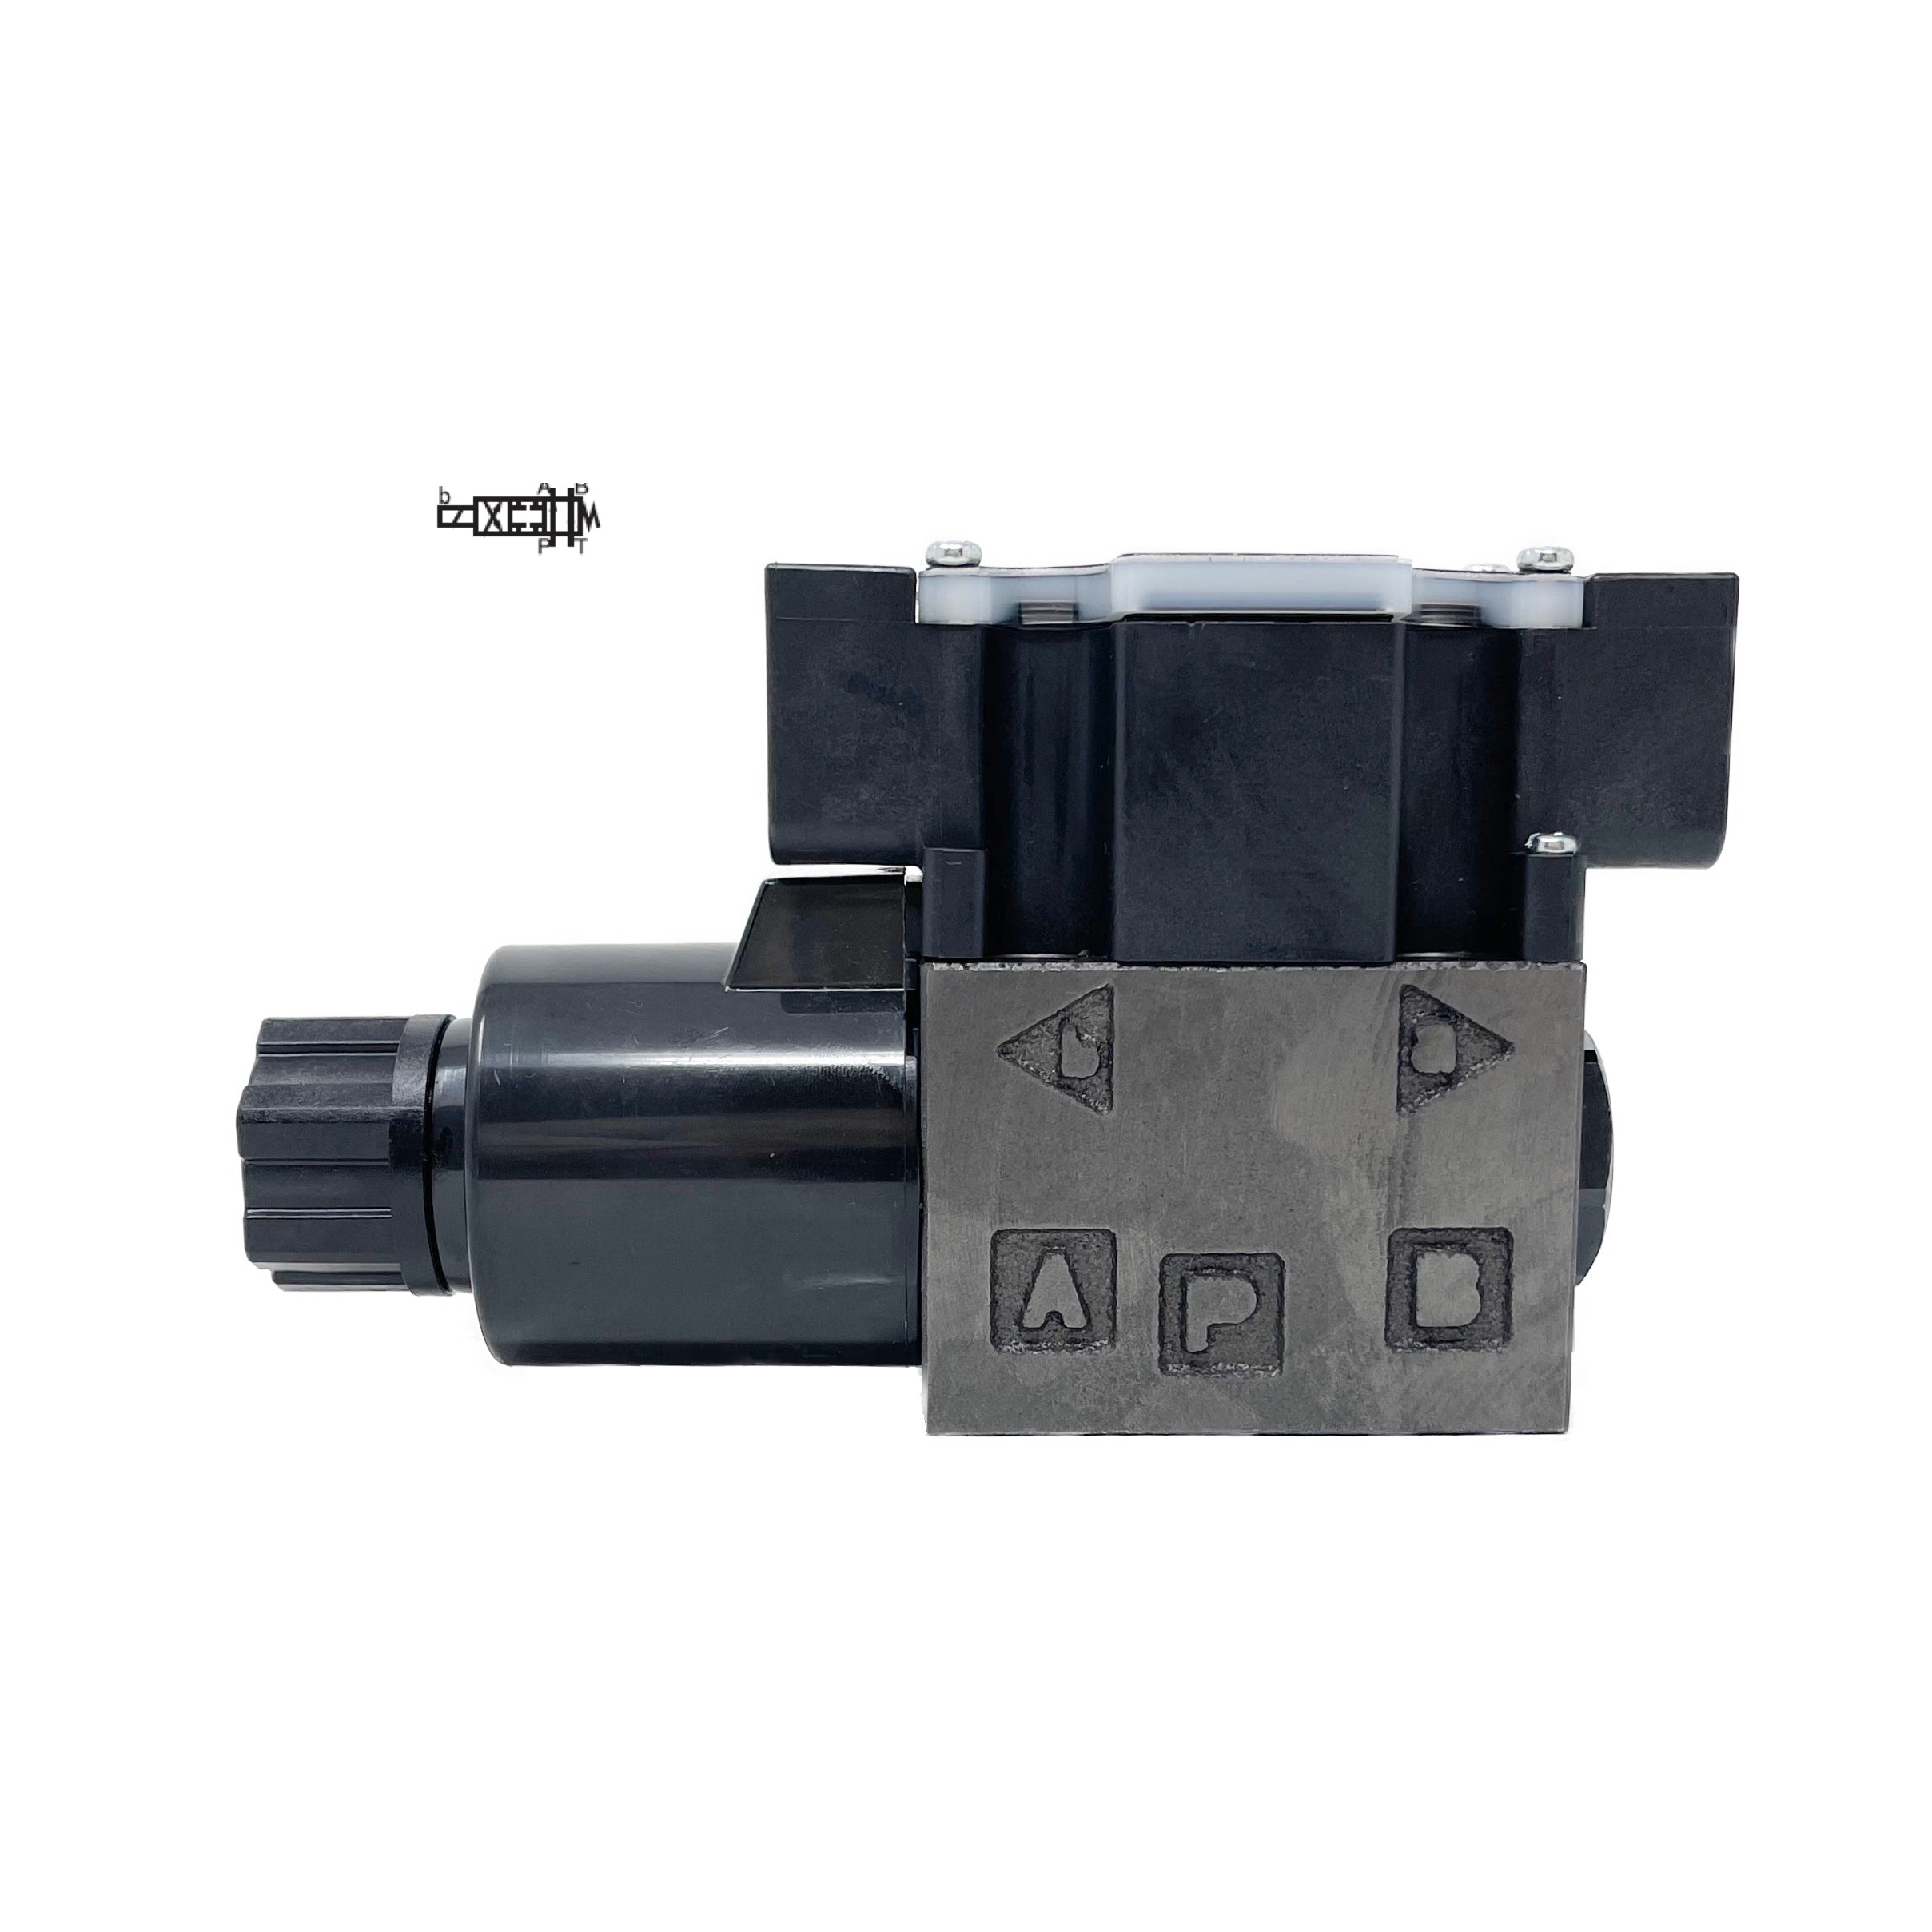 SS-G01-A3X-R-D1-E31 : Nachi Solenoid Valve, 3P4W, D03 (NG6), 21GPM, 5075psi, P to A, B to T in Neutral, 12 VDC, Wiring Box with Lights